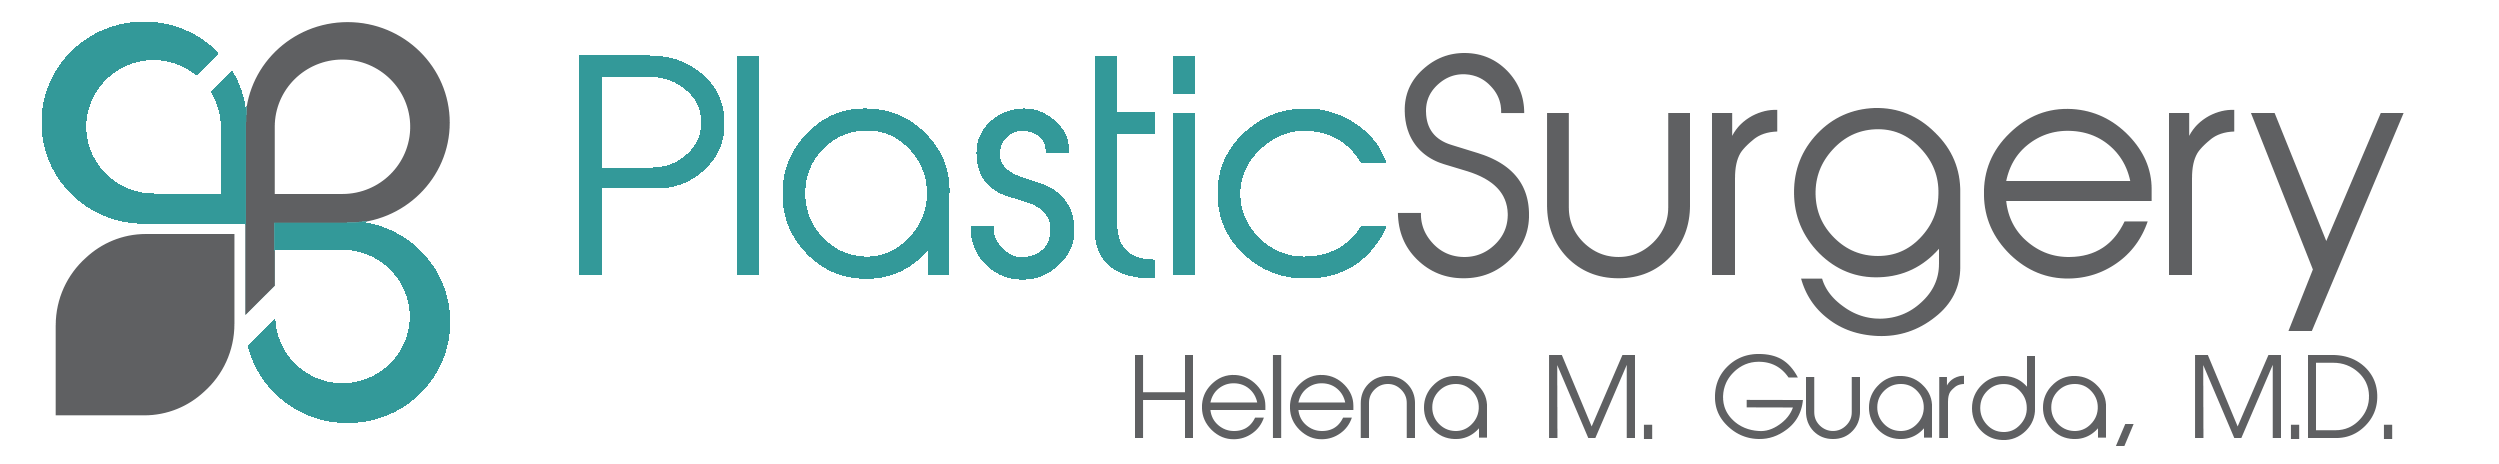 Plastic Surgery Specialists | Dr. Helena Guarda